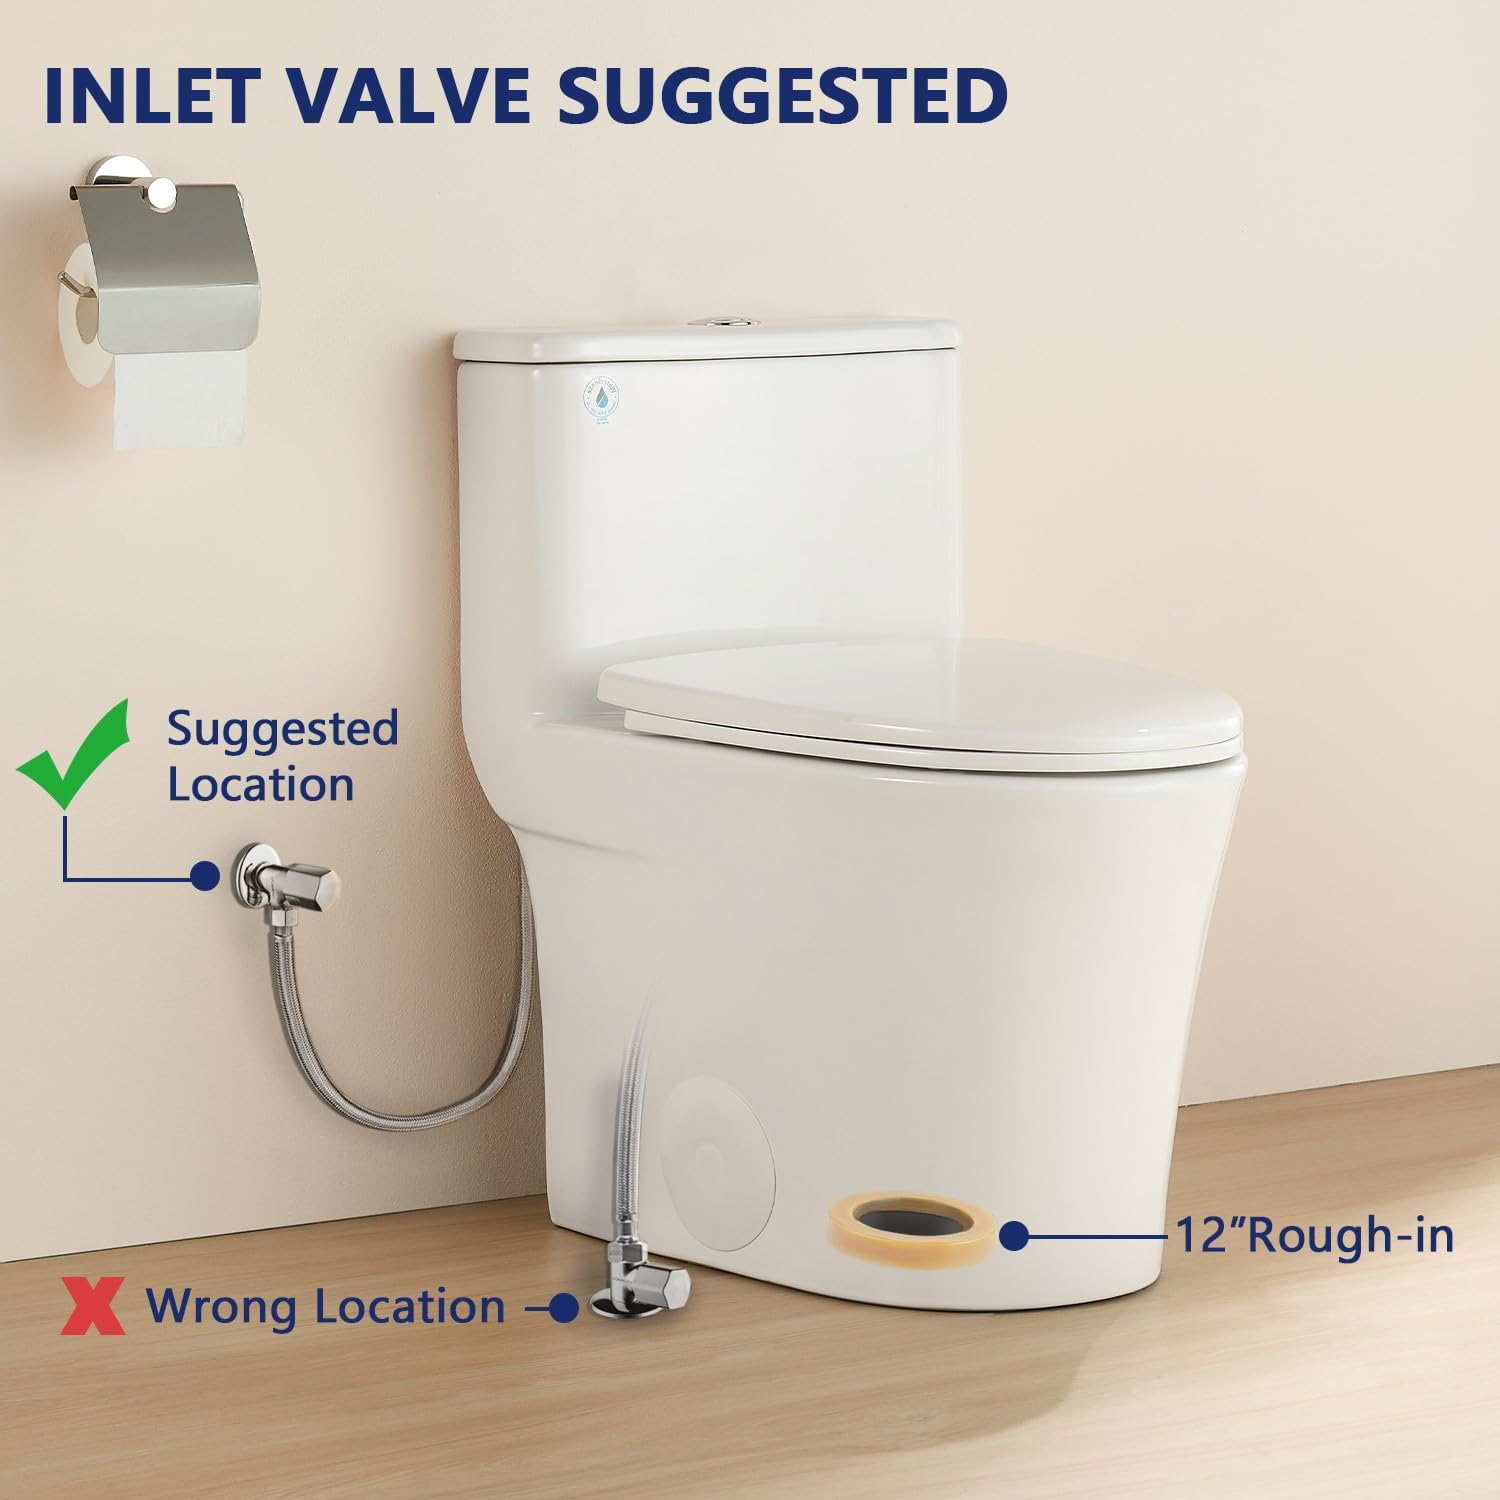 DeerValley Symmetry One Piece Toilet Elongated, Small Toilet Compact Modern One Piece Toilet with Soft Close Toilet Seat Ceramic Glossy White Toilets Single Flush for Small Bathroom Space DV-1F52807A